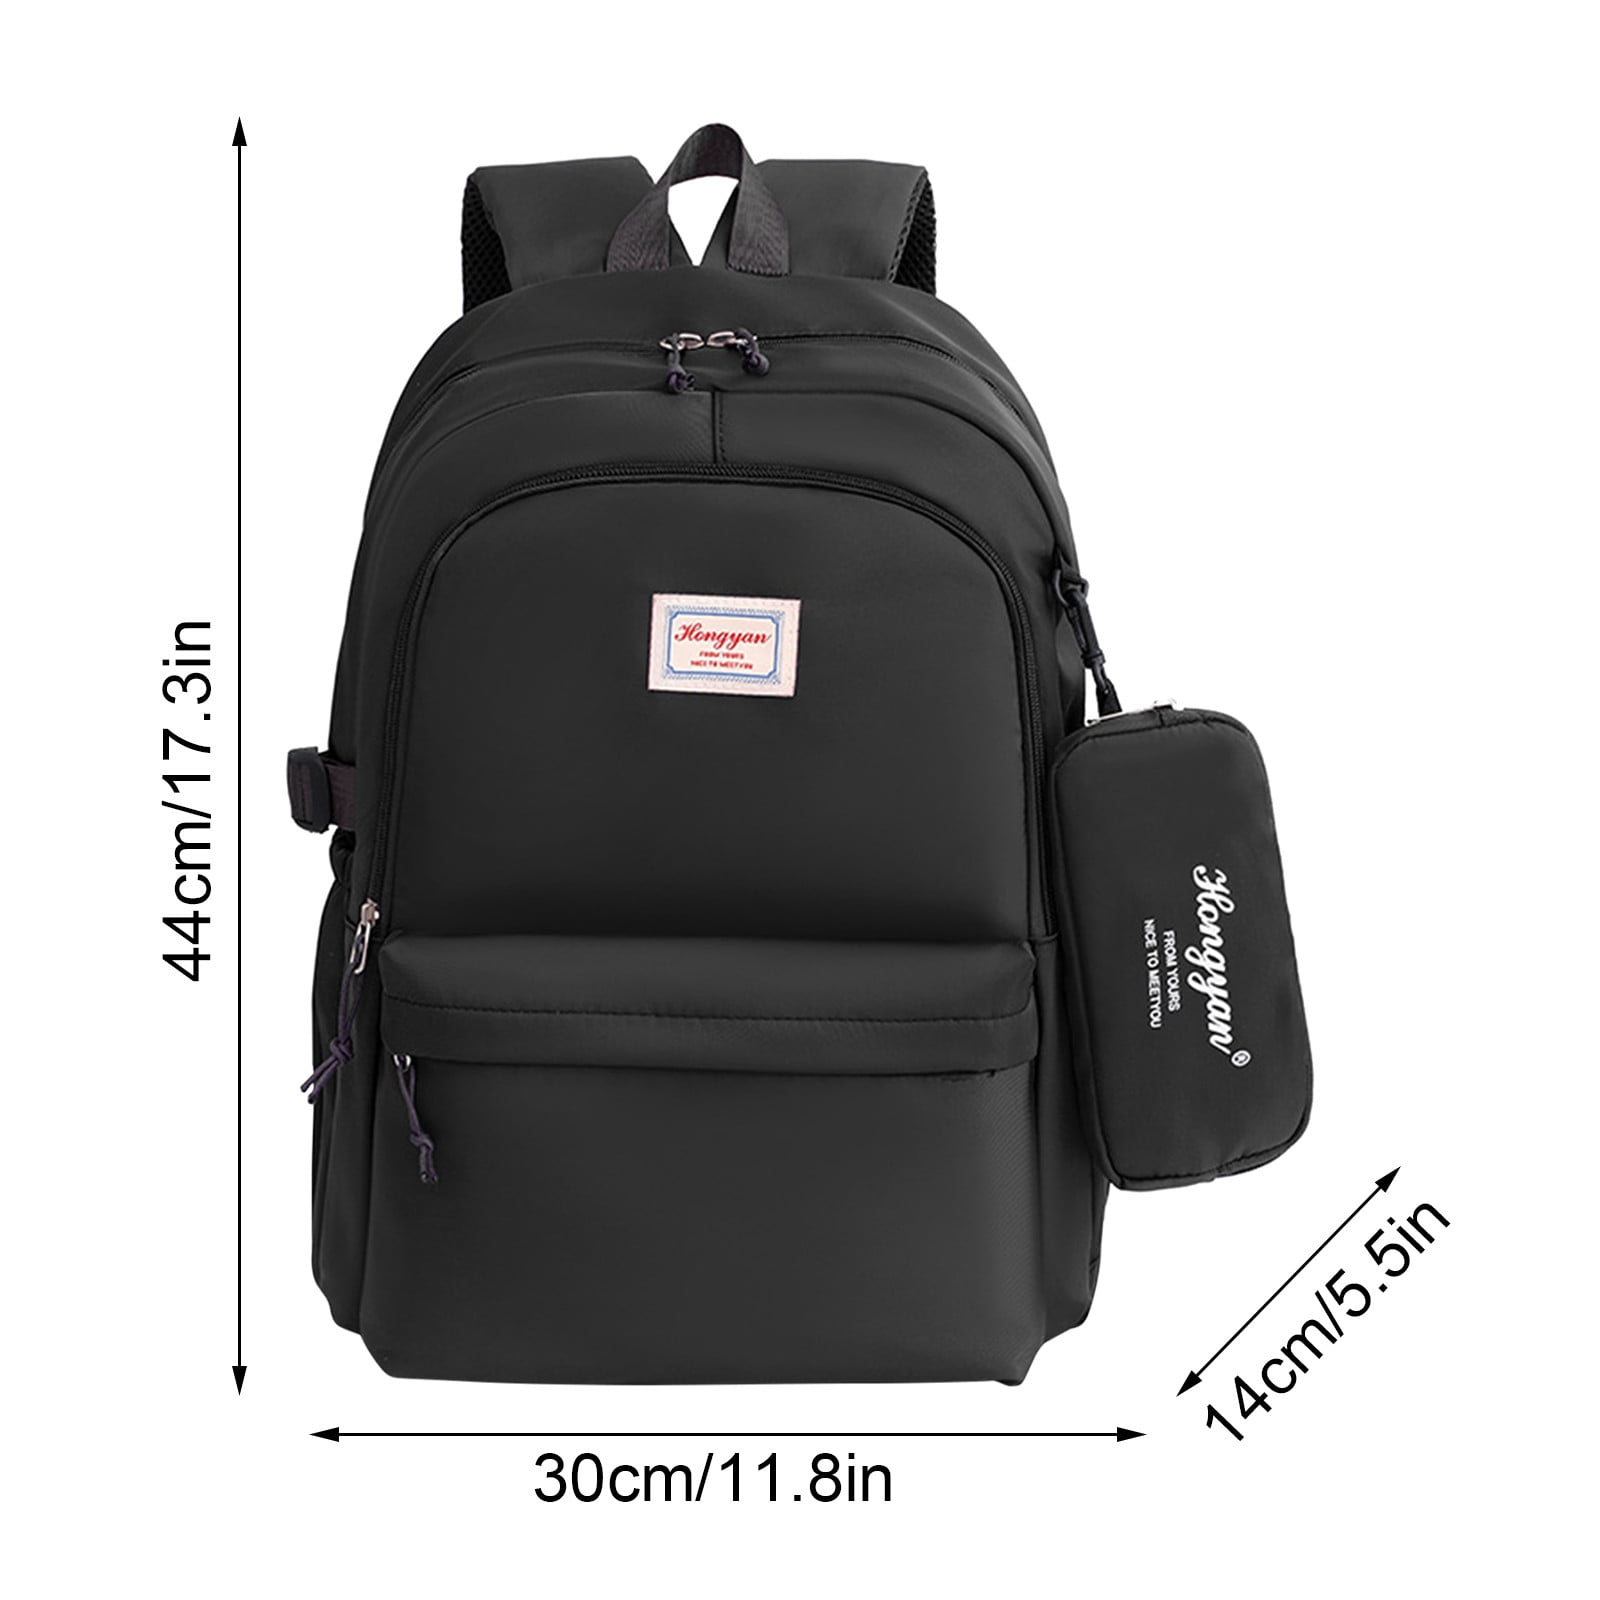 LL Backpacks Outdoor Bag For Studen Casual Daypack Yoga Gym Backpack School  Bags Teenager Mochila Rucksack #109 From Victor_wong, $35.38